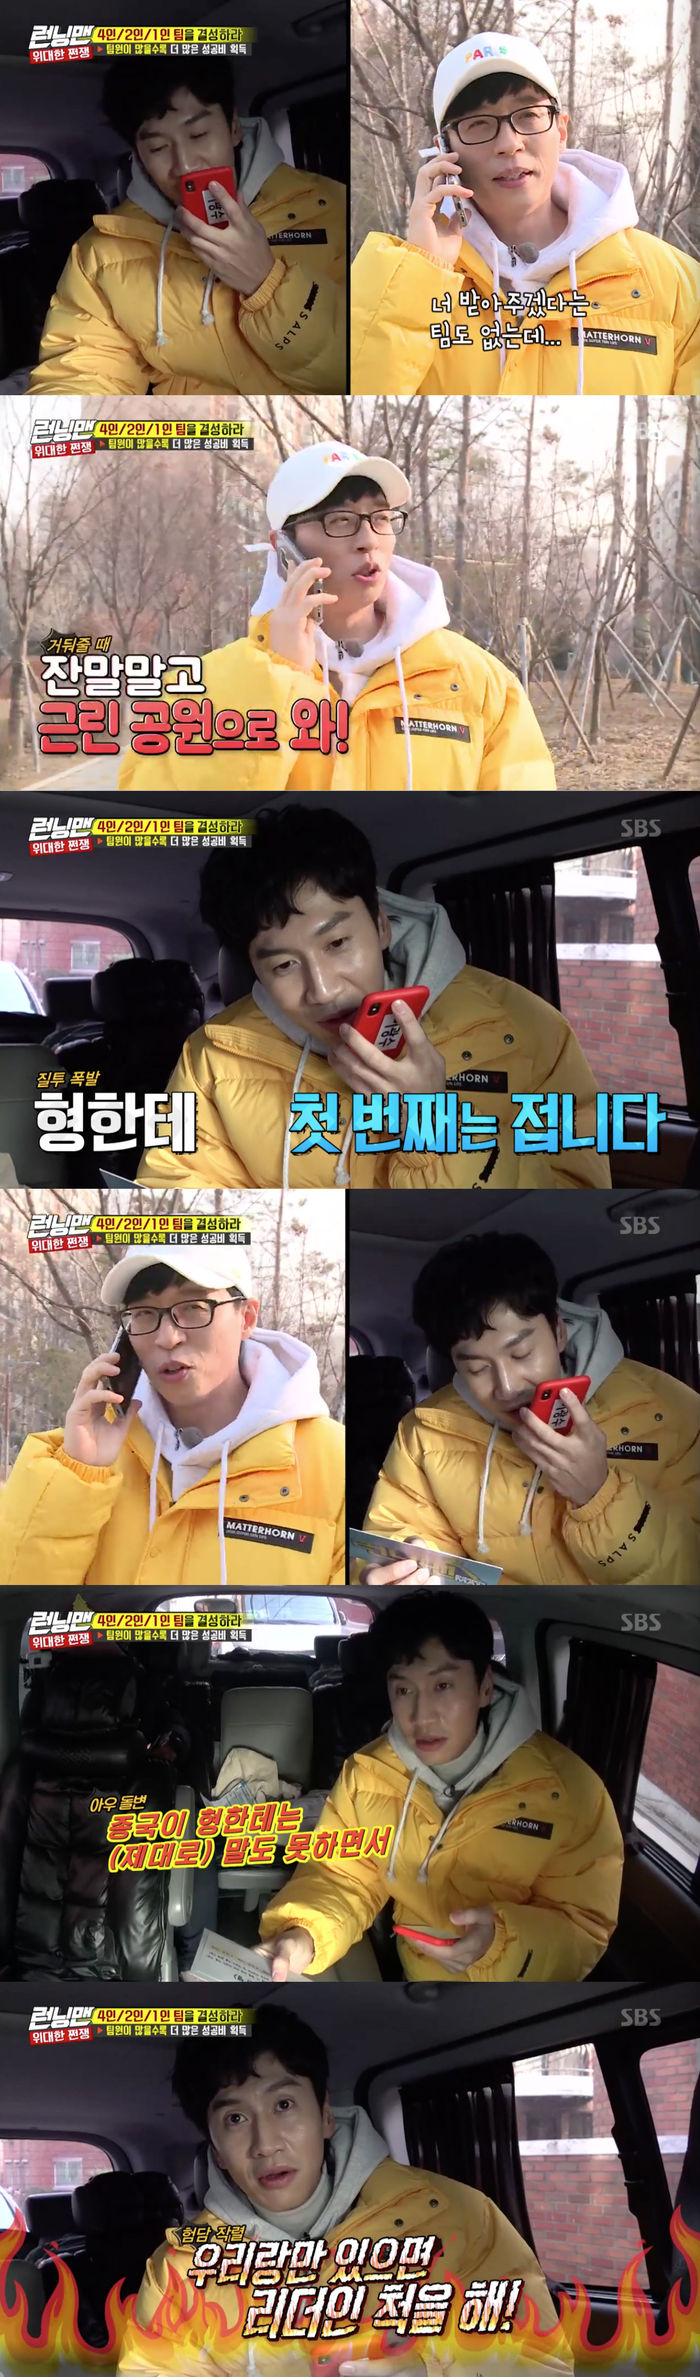 Lee Kwang-soo has complained about Yoo Jae-Suk.On SBS Running Man broadcasted on the 24th, one of the most money-earned men won the Great Heart race.On this day, the members appealed to the team to form a team and recruited the team members.Yoo Jae-Suk said to Lee Kwang-soo, I do not have a team to accept you, but my brother will accept it. Lee Kwang-soo also said, I will accept my brother as a team member.Yoo Jae-Suk said, Do not calm down, come to Cheongdam Neighborhood Park. I decided to form a team with Sechan. Lee Kwang-soo said, I am sad.I always have the first time for my brother. However, Lee Kwang-soo said, When the call with Yoo Jae-Suk is over, the end does not say anything to his brother, and pretends to be a leader only to us.